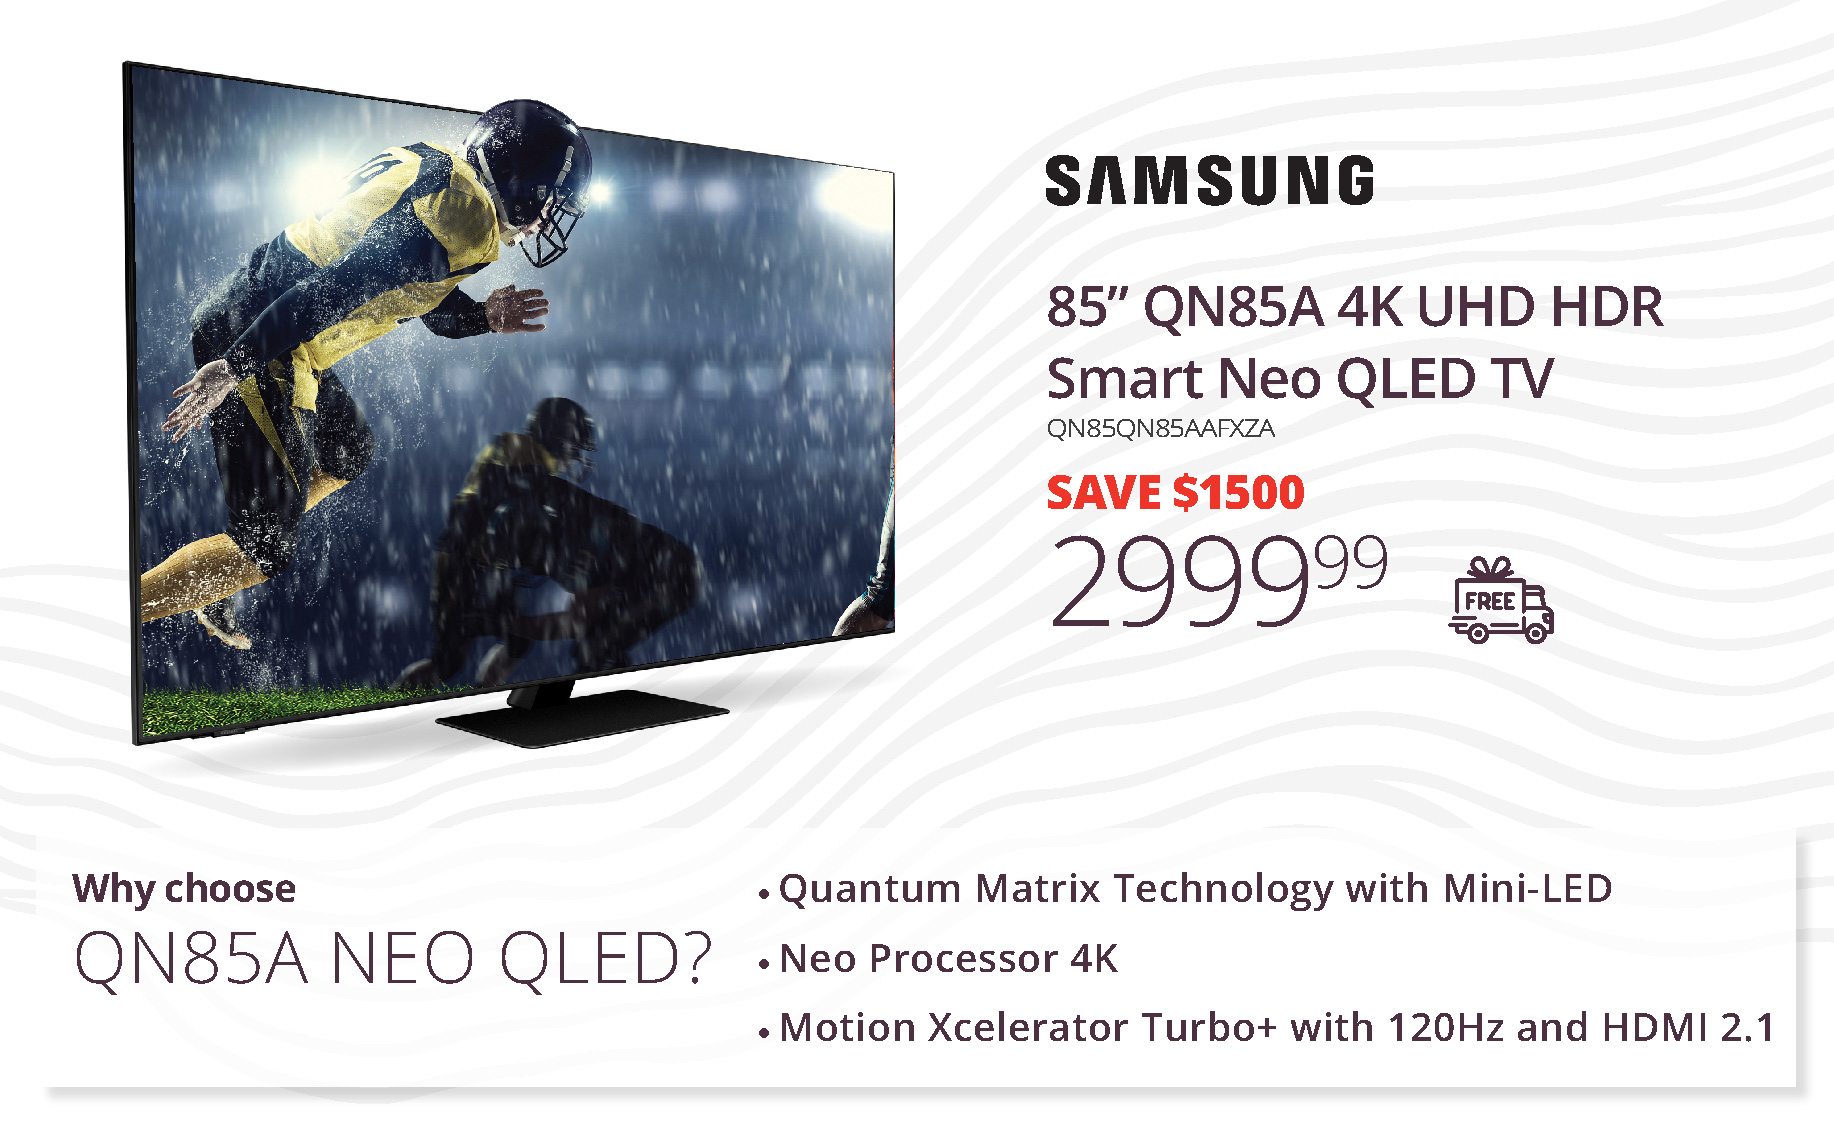 SAMSUNG | 85” Qn85A 4K UHD HDR | Smart Neo QLED TV | SAVE $1500 | 2,999.99 | Why choose QN85A Neo QLED? | Quantum Matrix Technology with Mini‑LED • Neo Processor 4K • Motion Xcelerator Turbo+ with 120Hz and HDMI 2.1